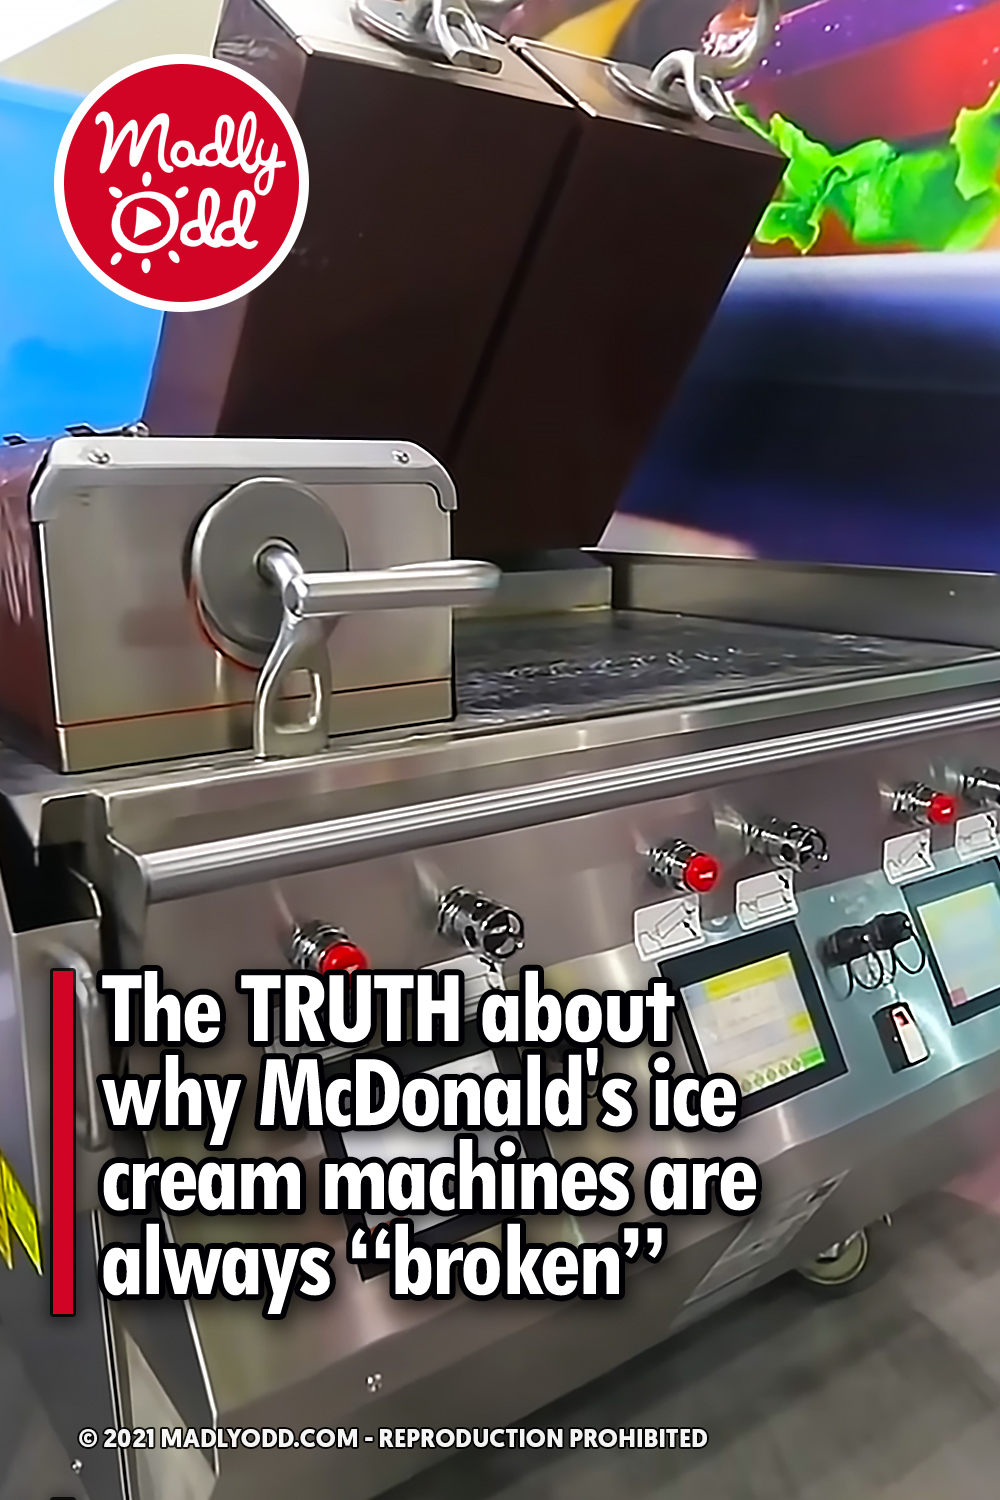 The TRUTH about why McDonald\'s ice cream machines are always “broken”